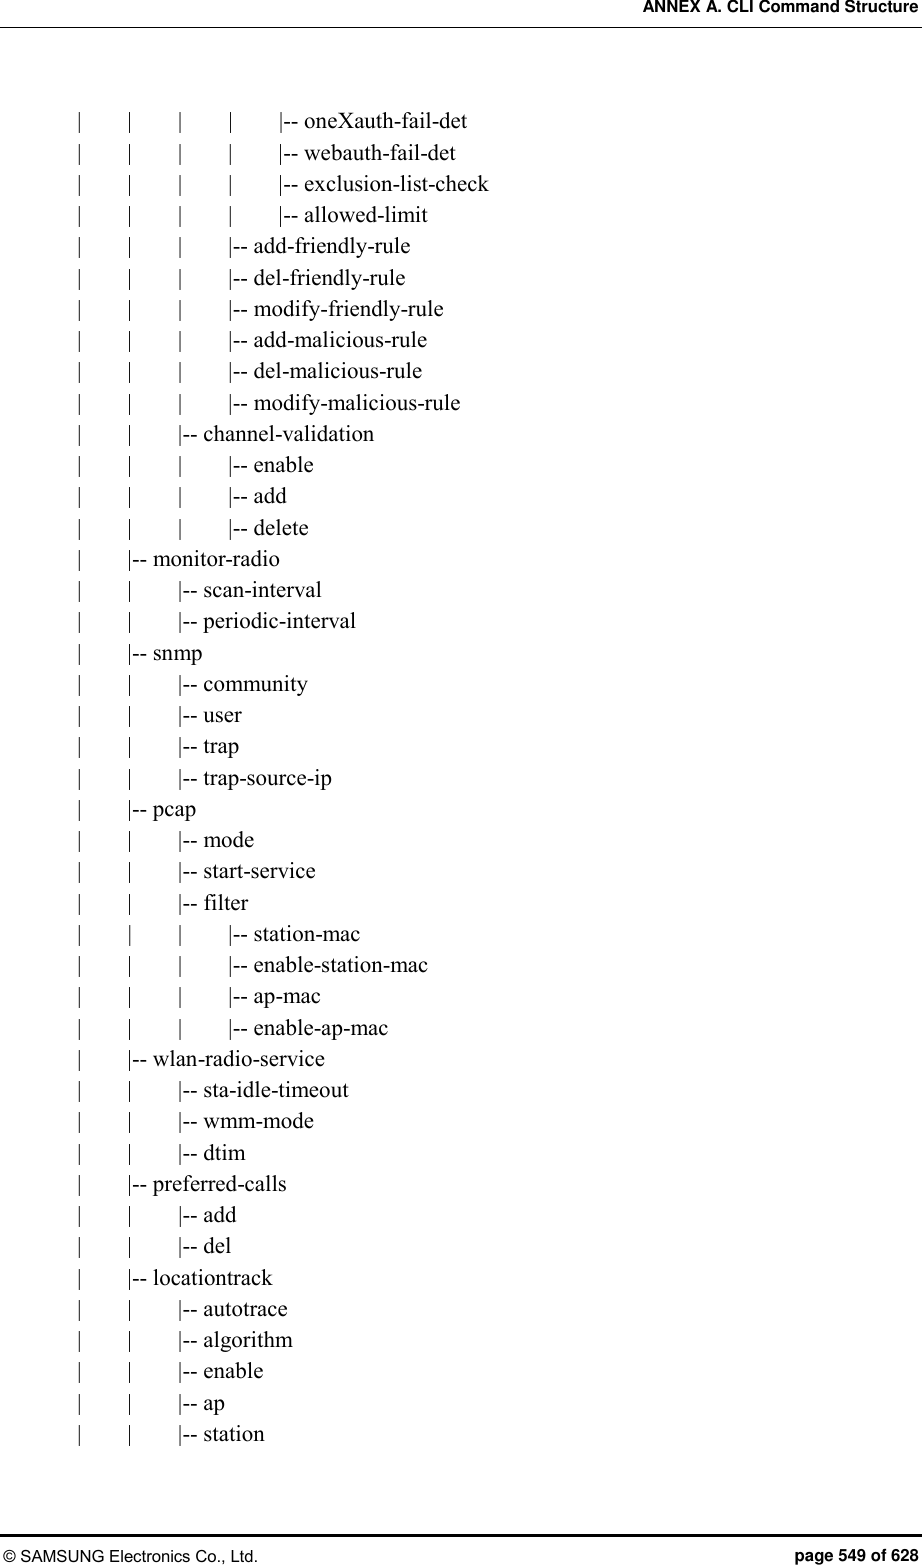 ANNEX A. CLI Command Structure © SAMSUNG Electronics Co., Ltd.  page 549 of 628 |        |        |    |        |-- oneXauth-fail-det |        |        |        |        |-- webauth-fail-det |        |        |        |        |-- exclusion-list-check |        |        |        |        |-- allowed-limit |        |        |        |-- add-friendly-rule |        |        |        |-- del-friendly-rule |        |        |        |-- modify-friendly-rule |        |        |        |-- add-malicious-rule |        |        |        |-- del-malicious-rule |        |        |        |-- modify-malicious-rule |        |        |-- channel-validation |        |        |        |-- enable |        |        |        |-- add |        |        |        |-- delete |        |-- monitor-radio |        |        |-- scan-interval |        |        |-- periodic-interval |        |-- snmp |        |        |-- community |        |        |-- user |        |        |-- trap |        |        |-- trap-source-ip |        |-- pcap |        |        |-- mode |        |        |-- start-service |        |        |-- filter |        |        |        |-- station-mac |        |        |        |-- enable-station-mac |        |        |        |-- ap-mac |        |        |        |-- enable-ap-mac |        |-- wlan-radio-service |        |        |-- sta-idle-timeout |        |        |-- wmm-mode |        |        |-- dtim |        |-- preferred-calls |        |    |-- add |        |        |-- del |        |-- locationtrack |        |        |-- autotrace |        |        |-- algorithm |        |        |-- enable |        |        |-- ap |        |        |-- station 